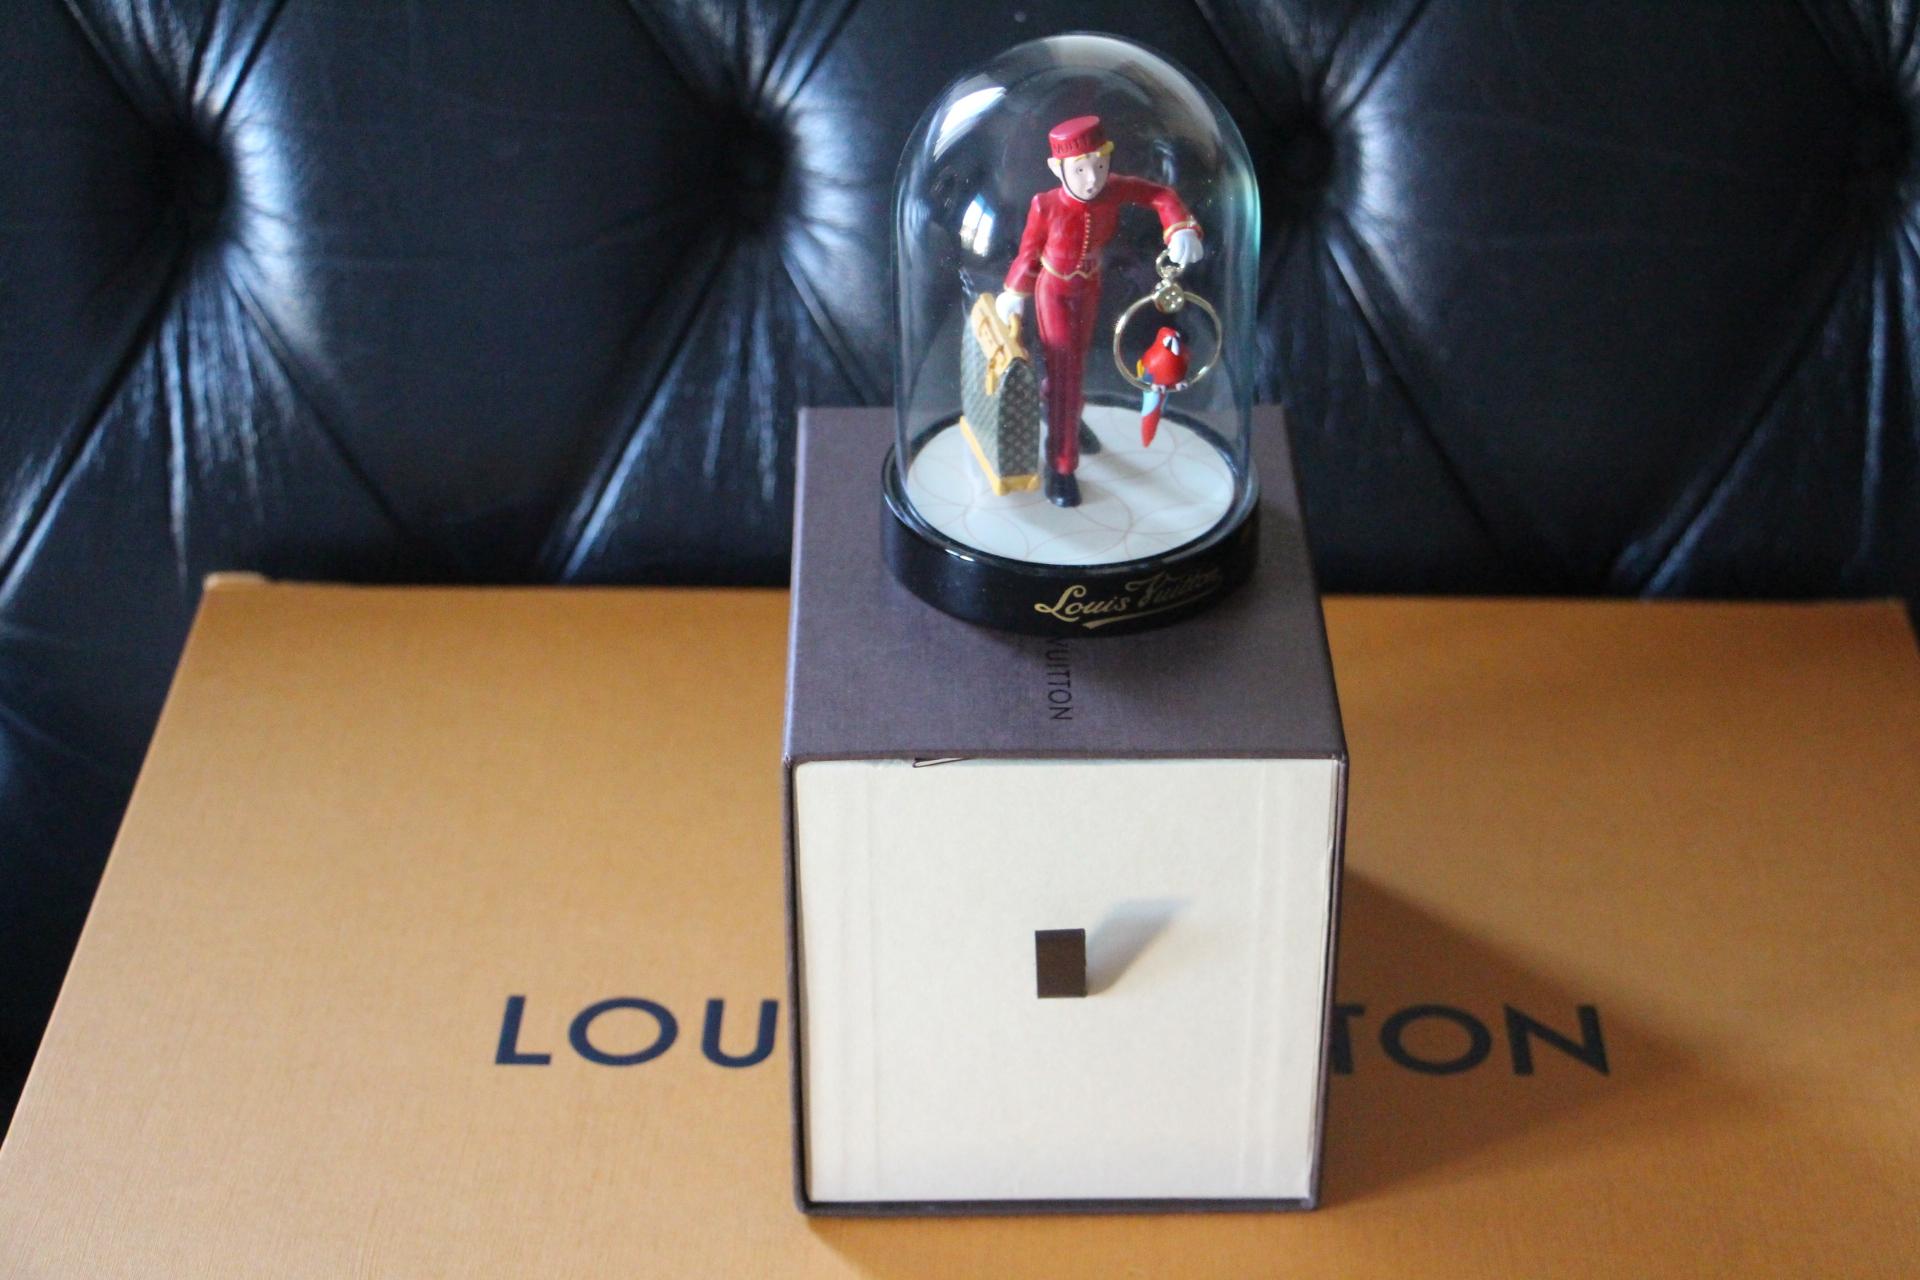 Rare limted edition of Louis Vuitton glass globe called 